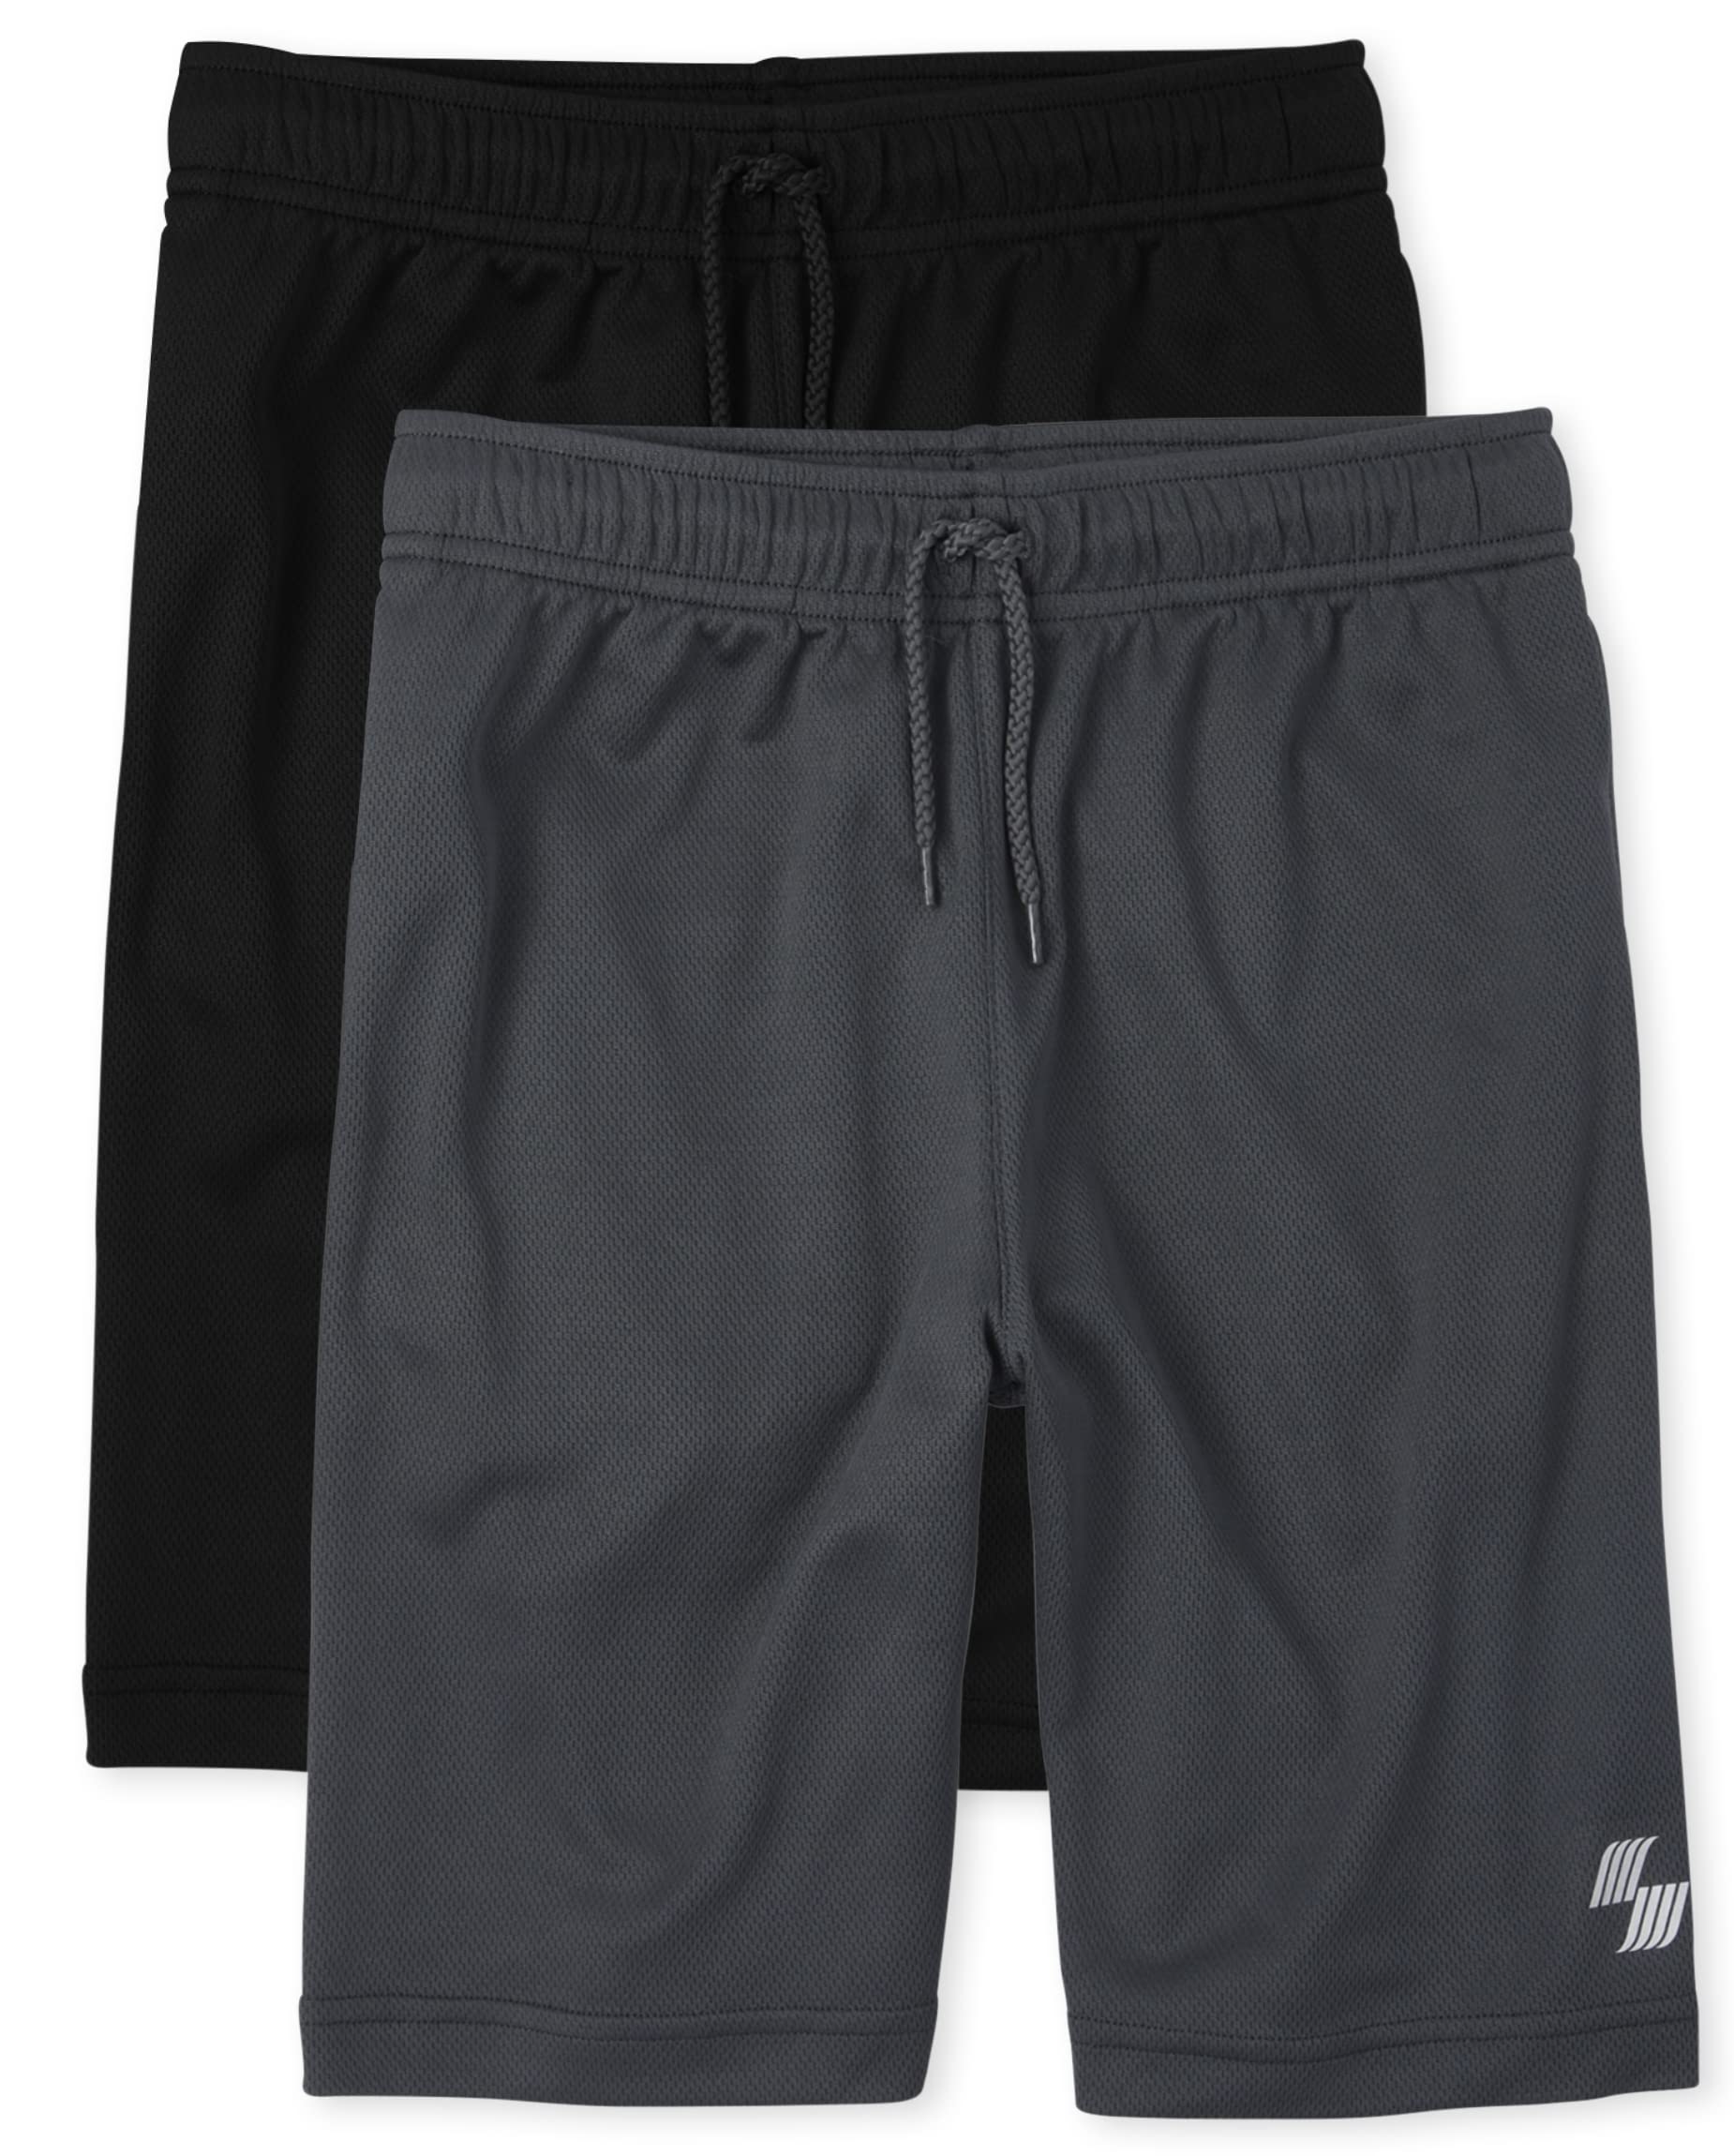 The Children's Place Boys' Athletic Mesh Shorts, 2 Pack